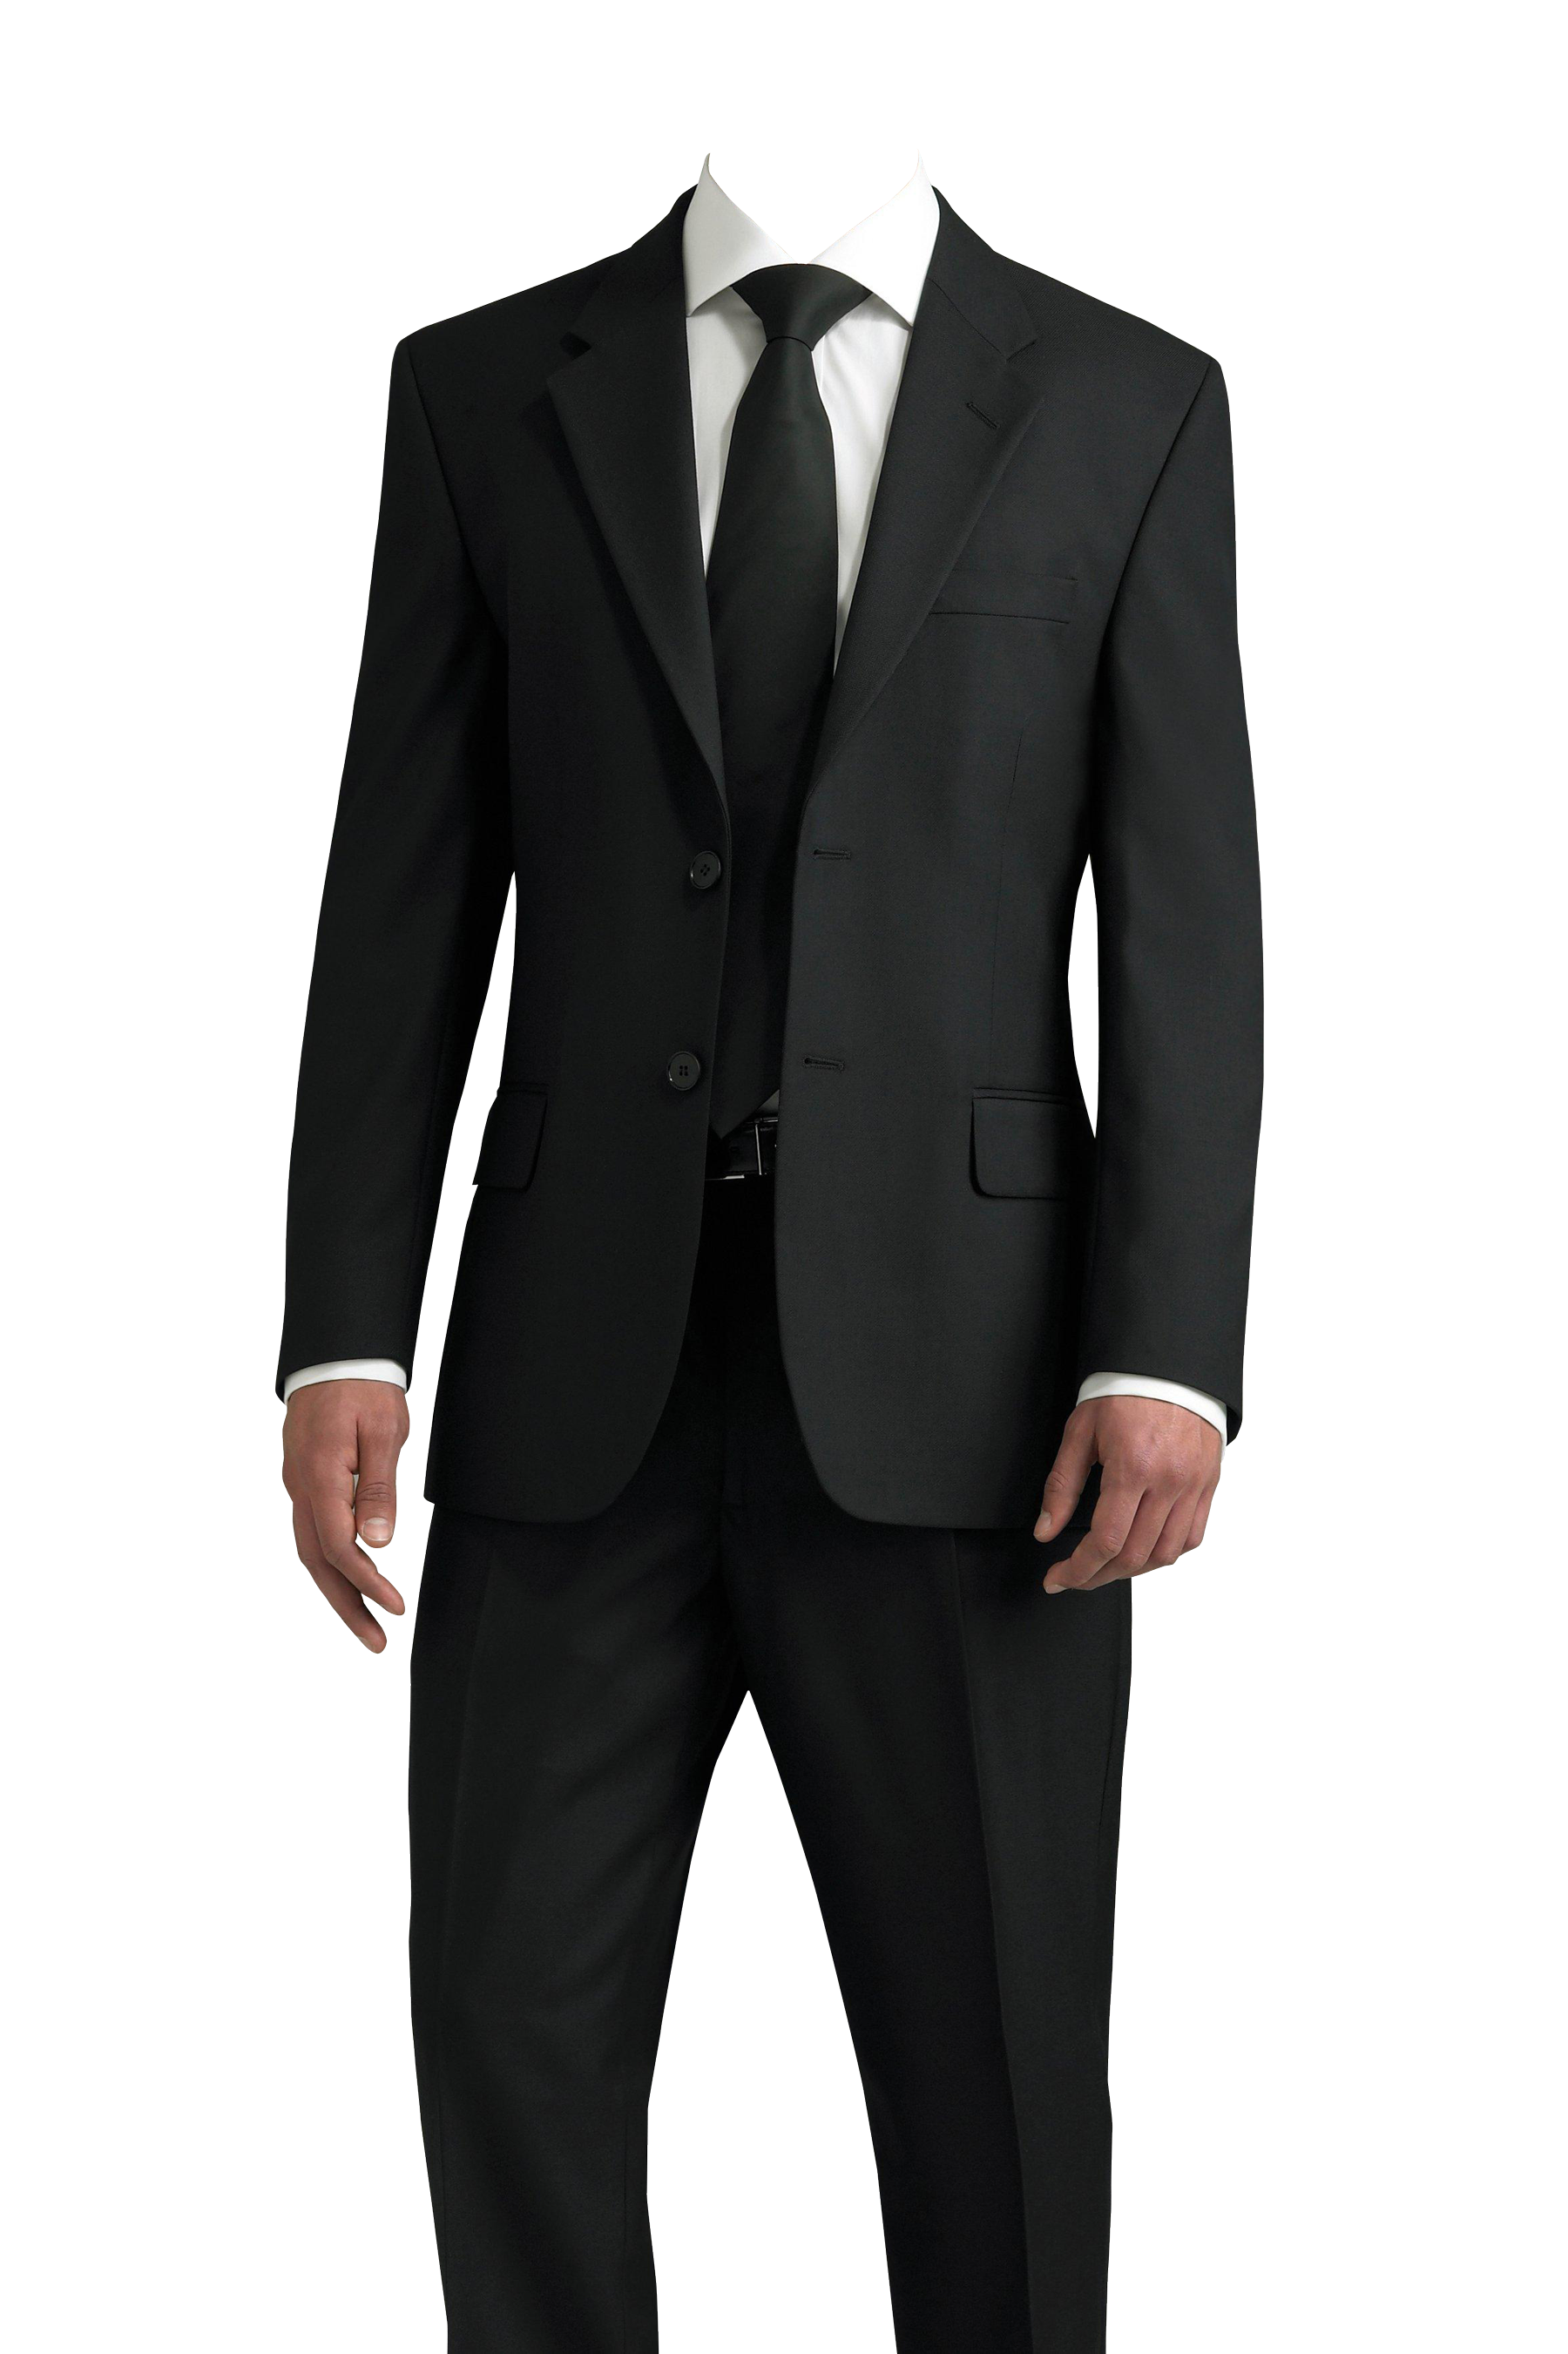 Man In Suit PNG Image with Transparent Background